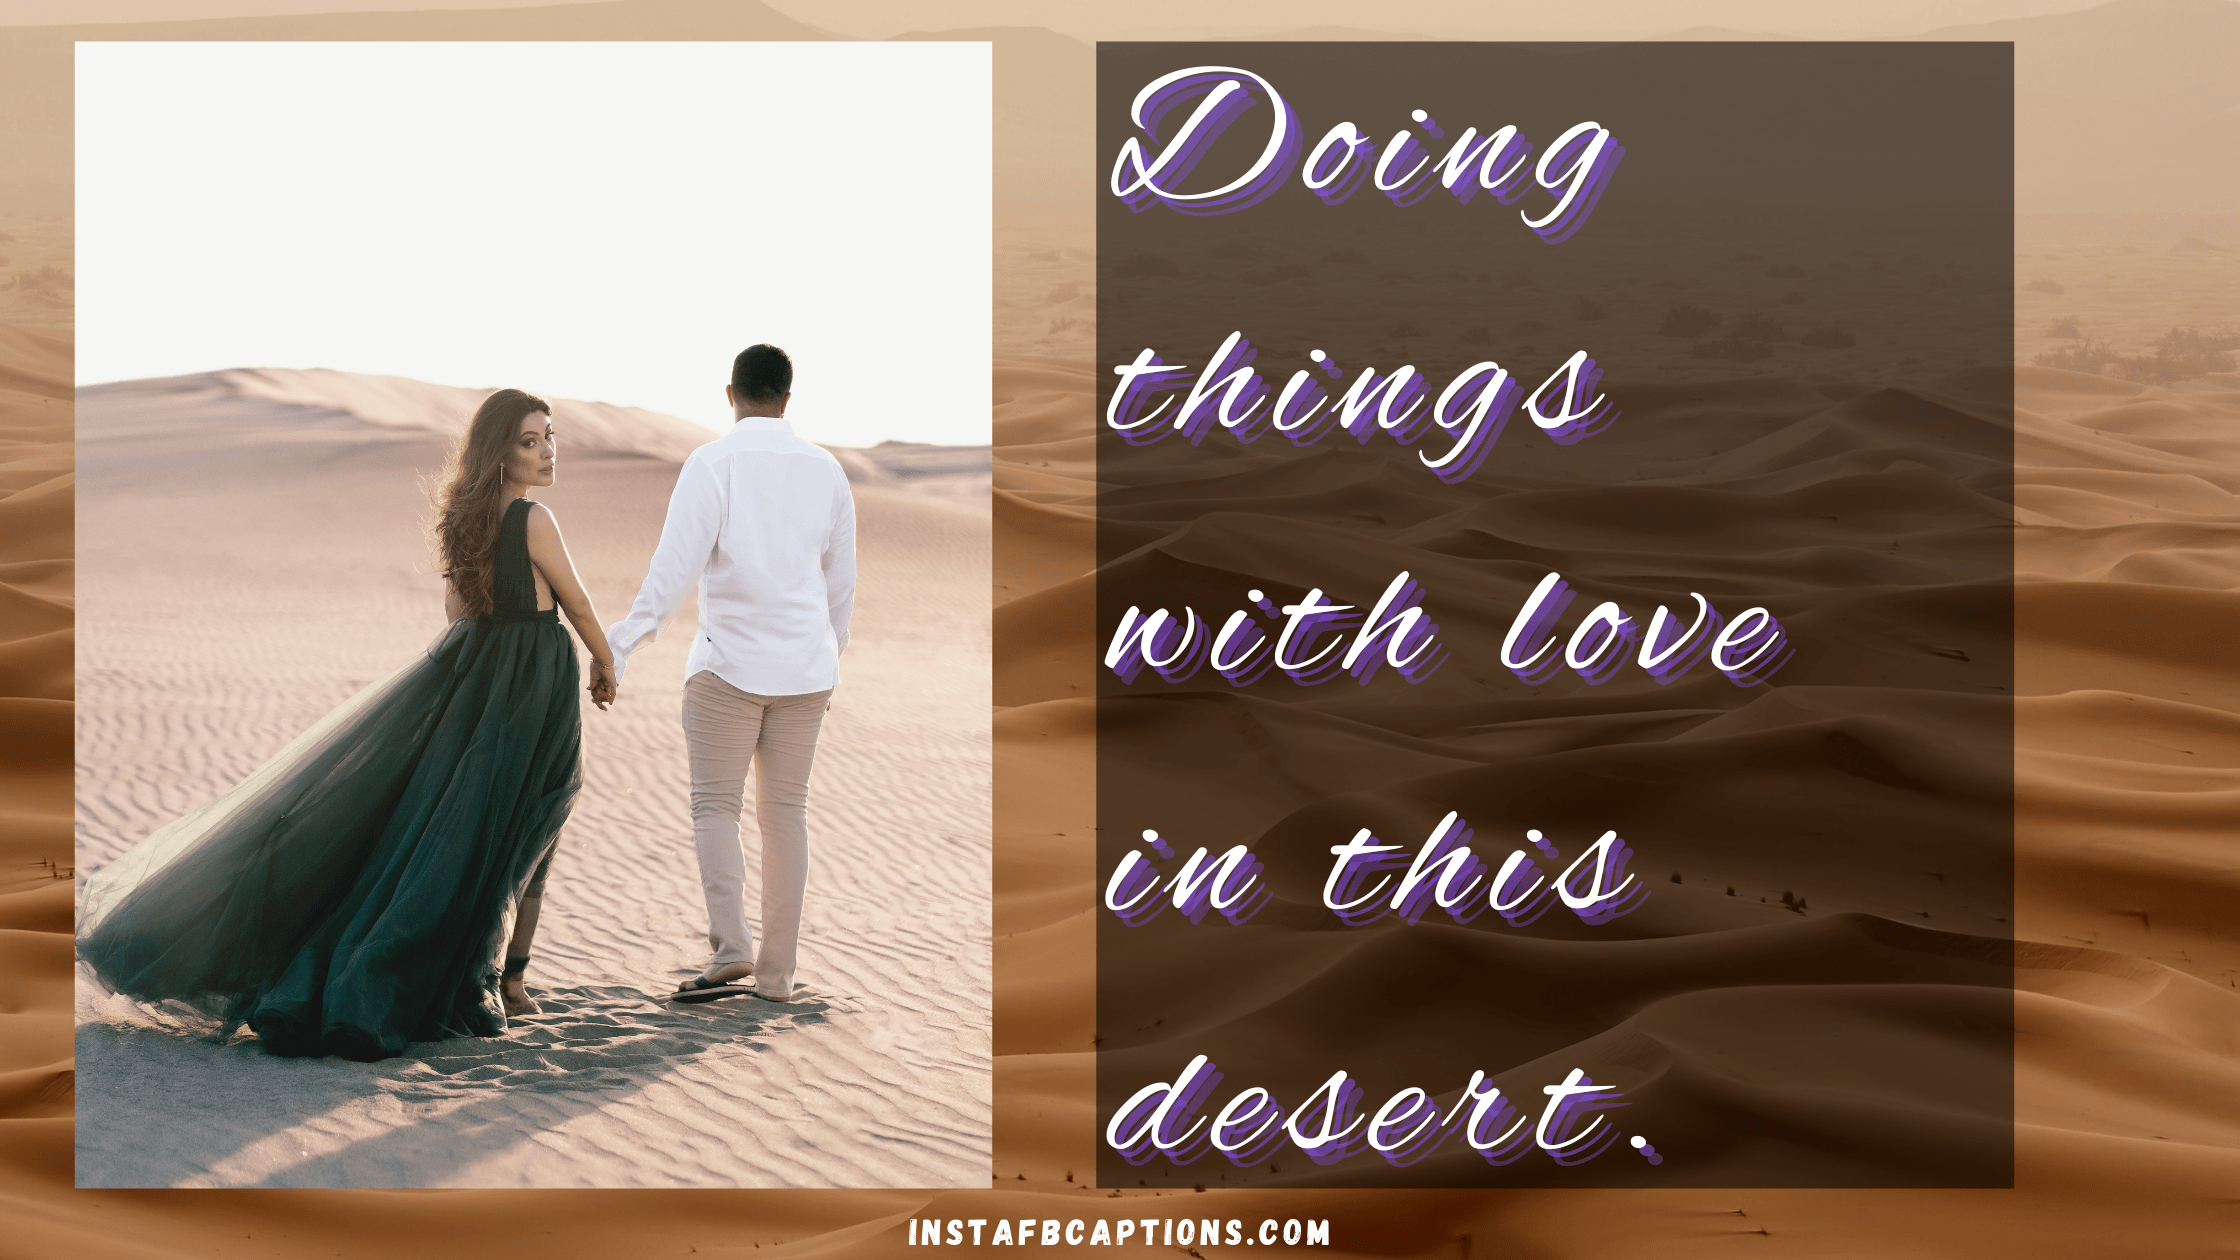 Perfect Honeymoon At Desert Captions  - Perfect Honeymoon At Desert Captions - 92 Desert Instagram Captions Quotes in 2022